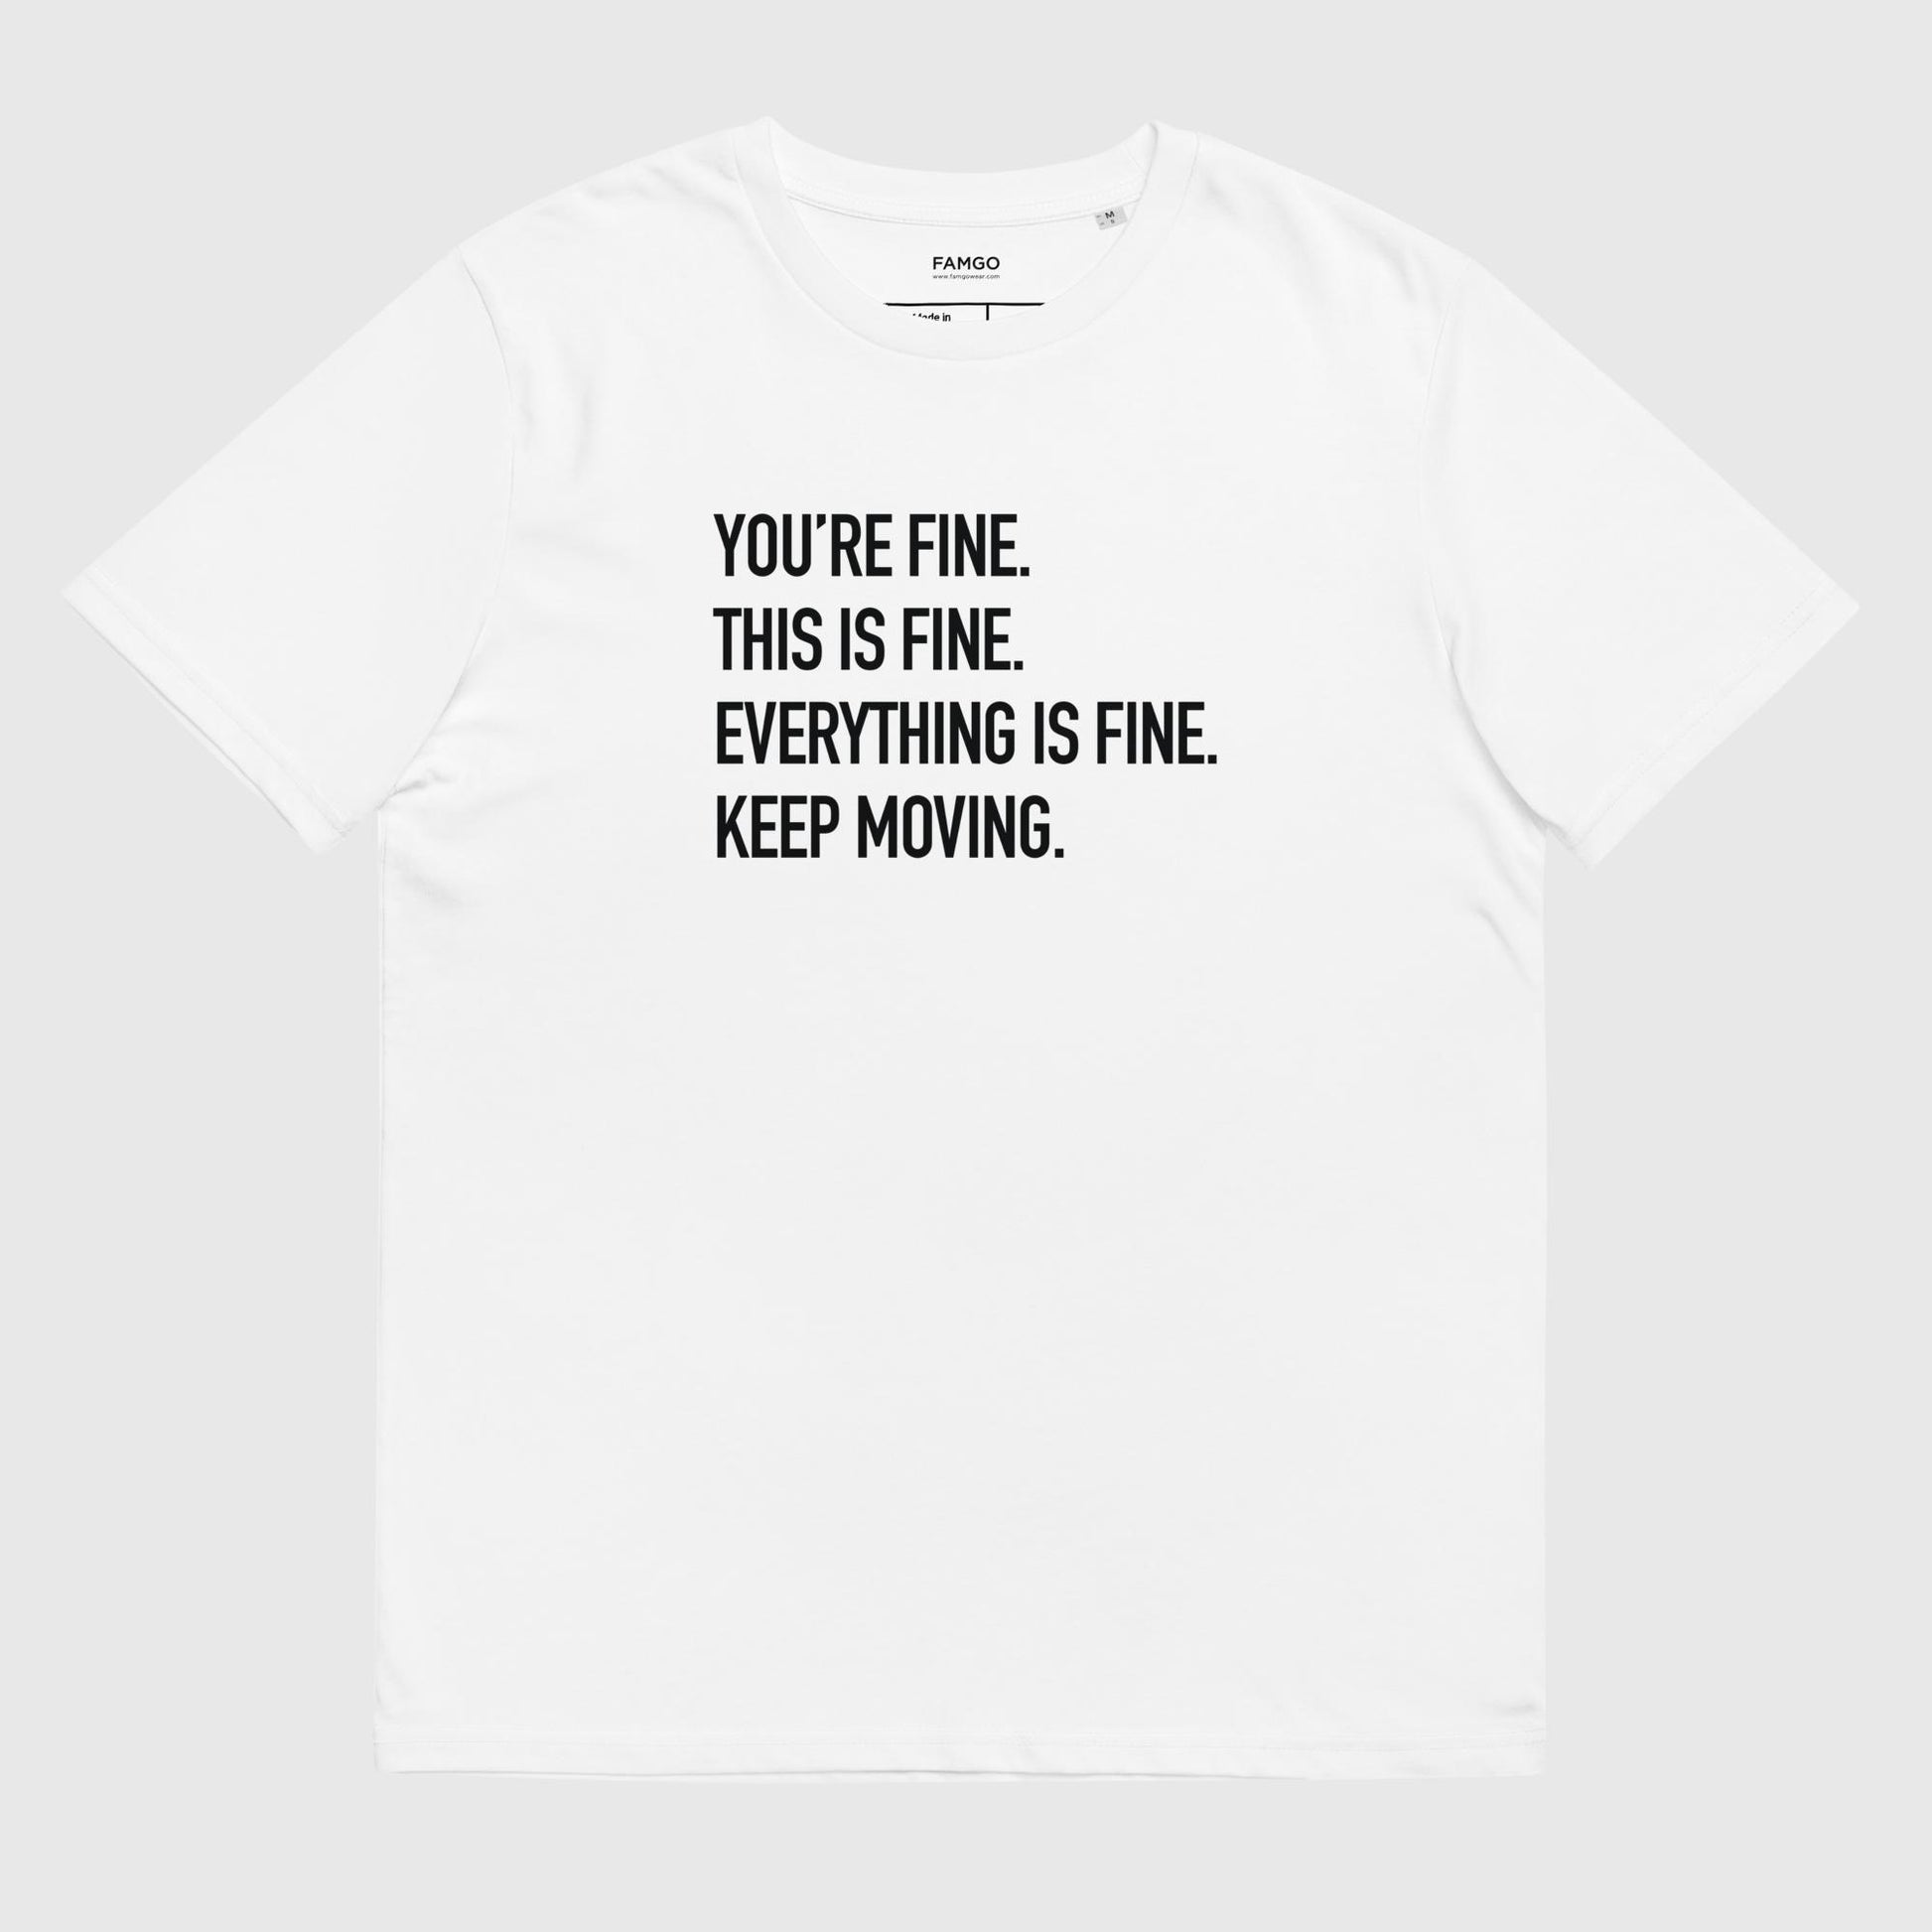 Men's white organic cotton t-shirt that features Courtney Dauwalter's mantra, "You're fine. This is fine. Everything is fine. Keep moving."